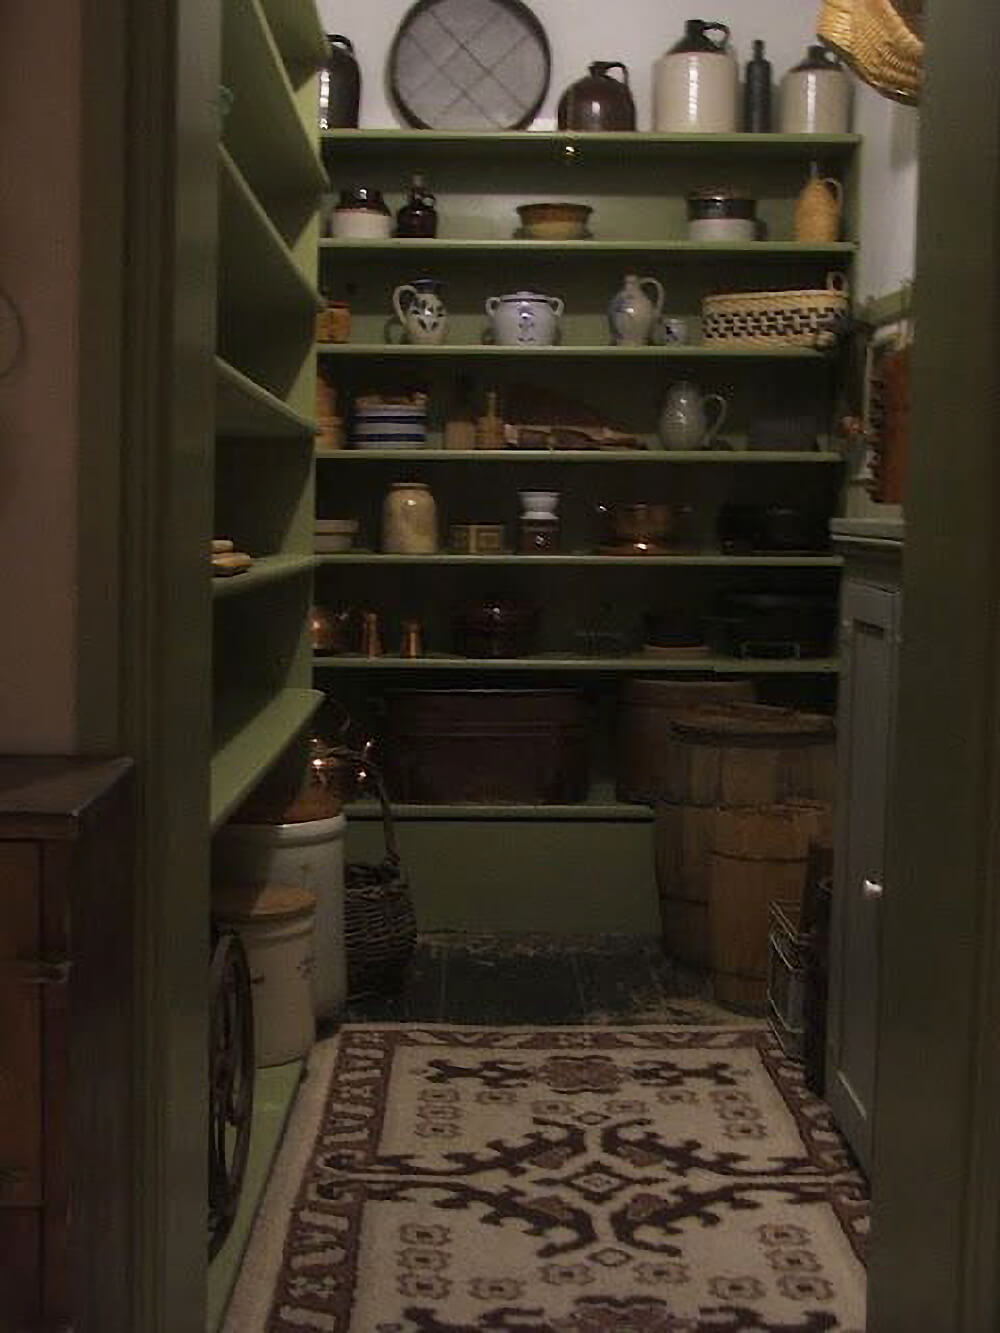 An old-fashioned walk-in pantry room.